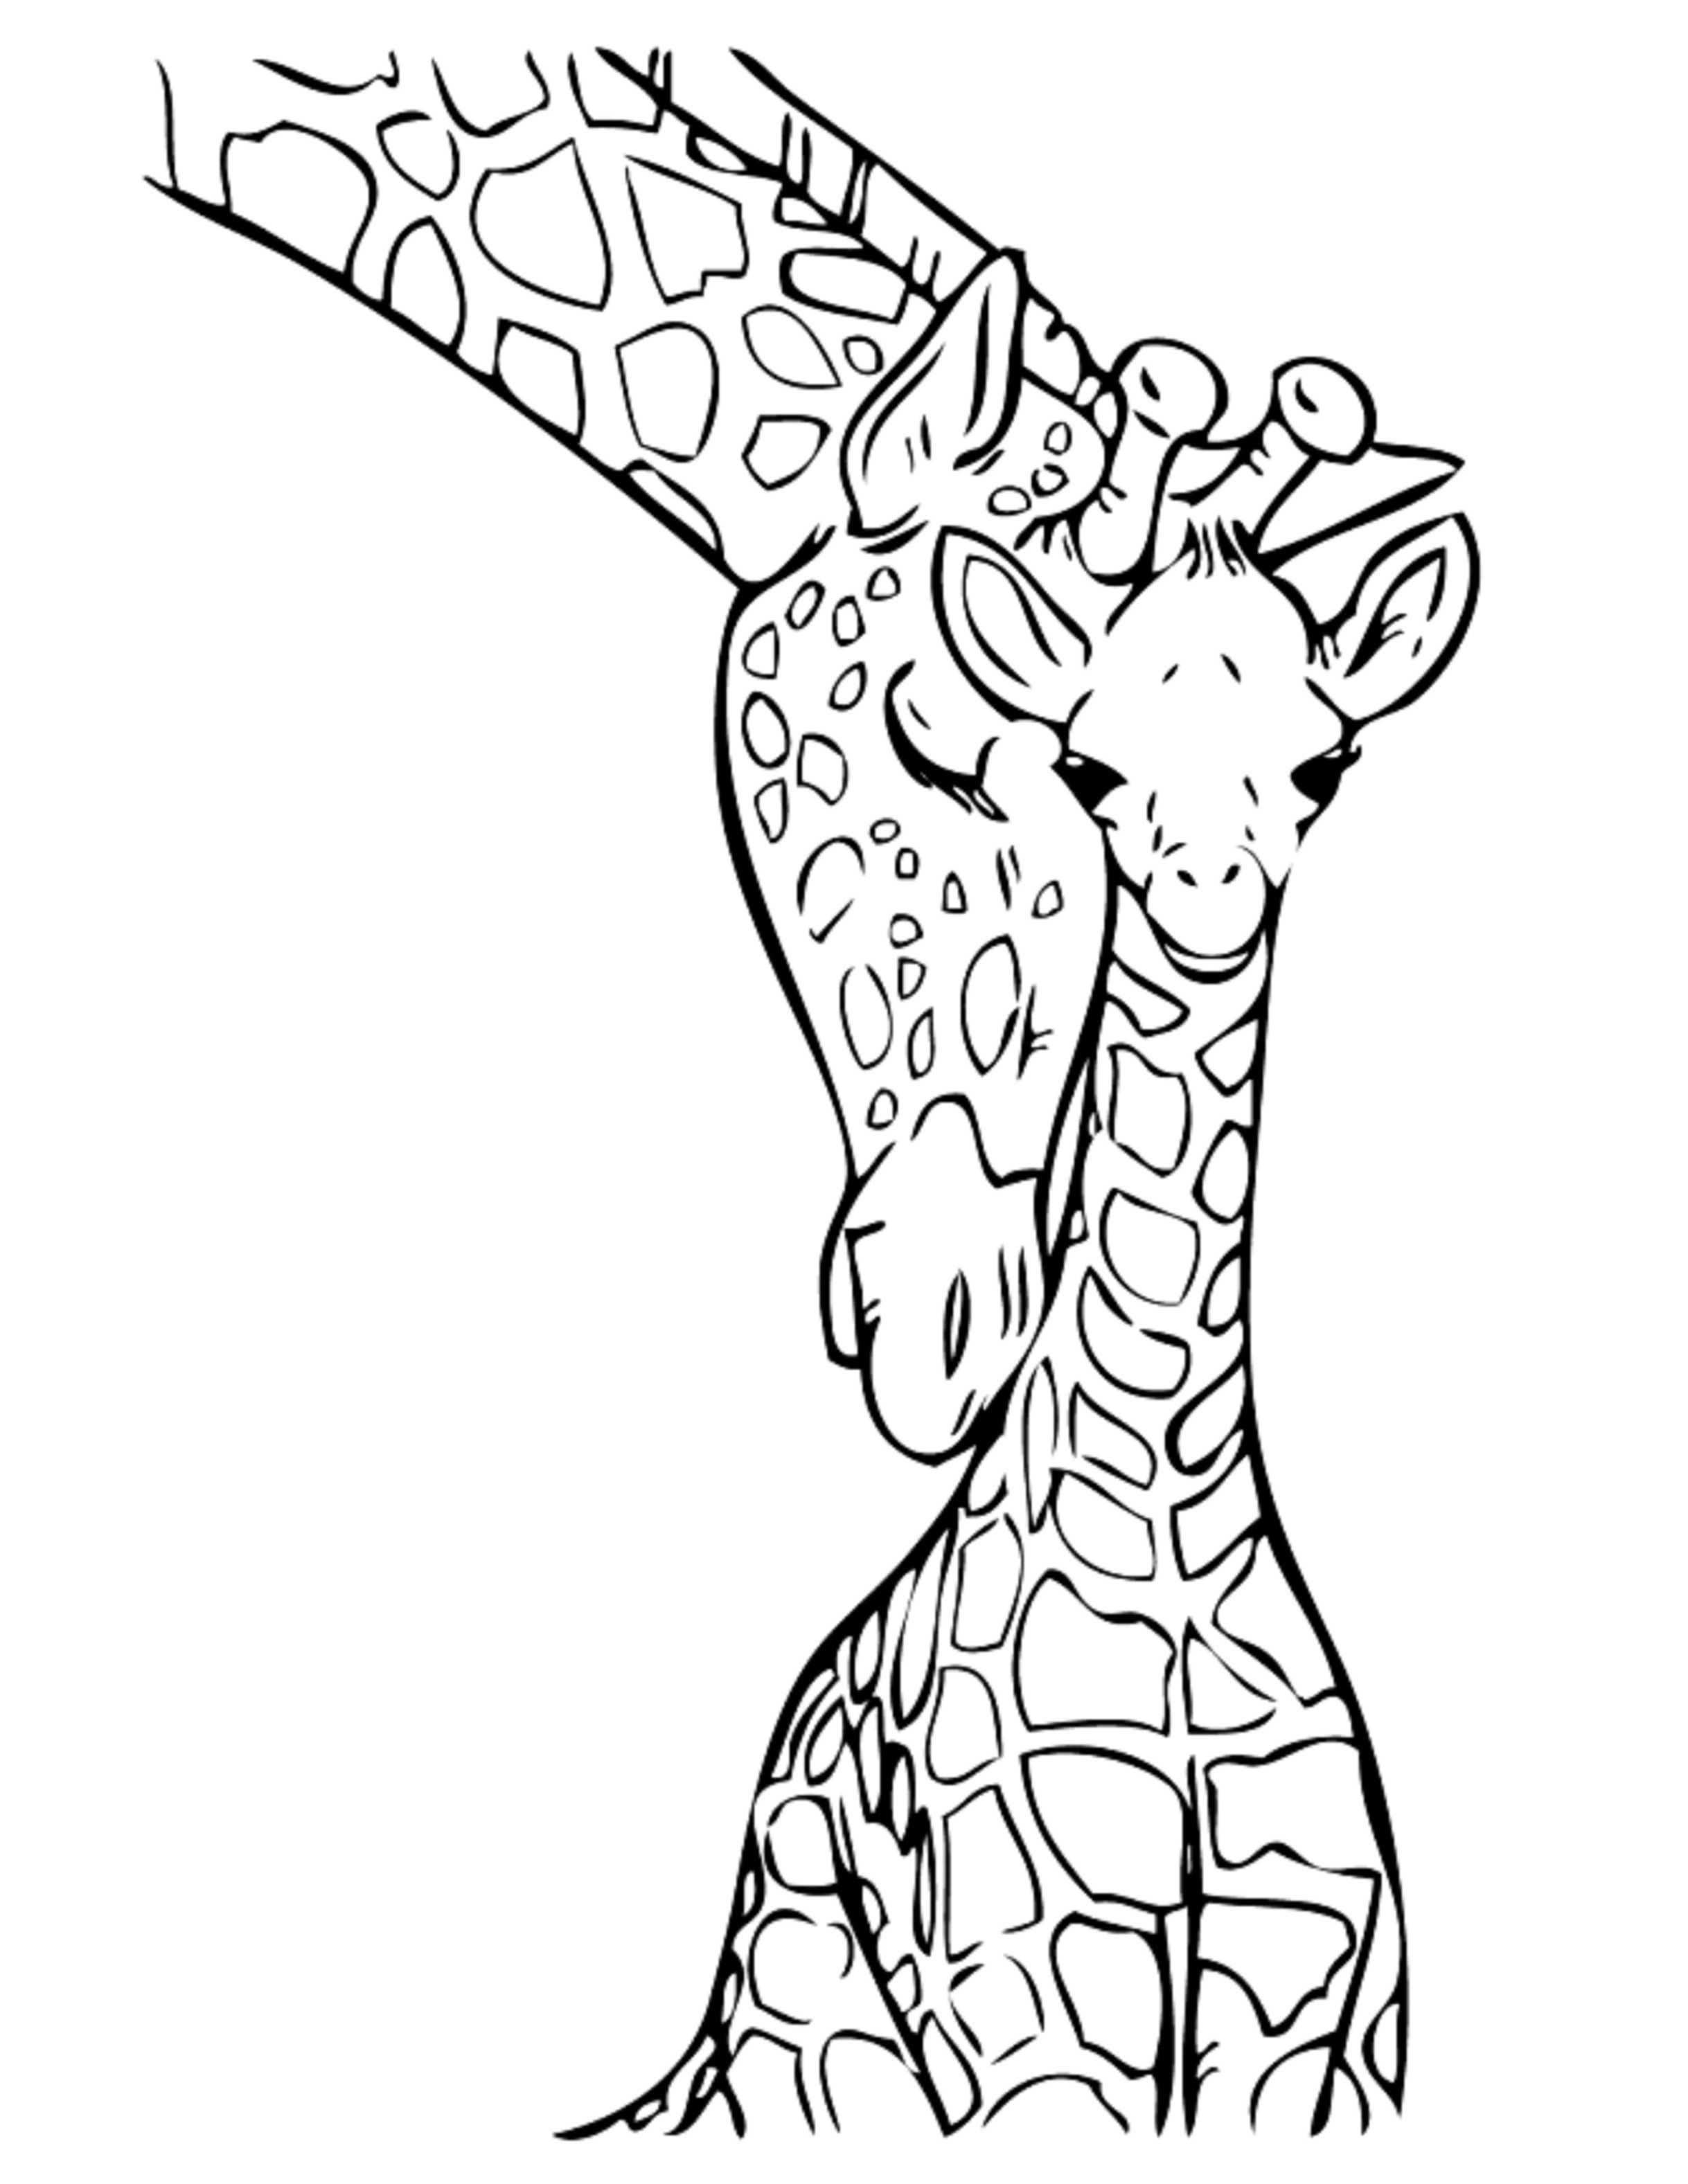 Animal Jam Coloring Pages Luxury Animal Jam Otter Coloring Page Monkey Halloween Bunny Arcti Giraffe Coloring Pages Jungle Coloring Pages Animal Coloring Books